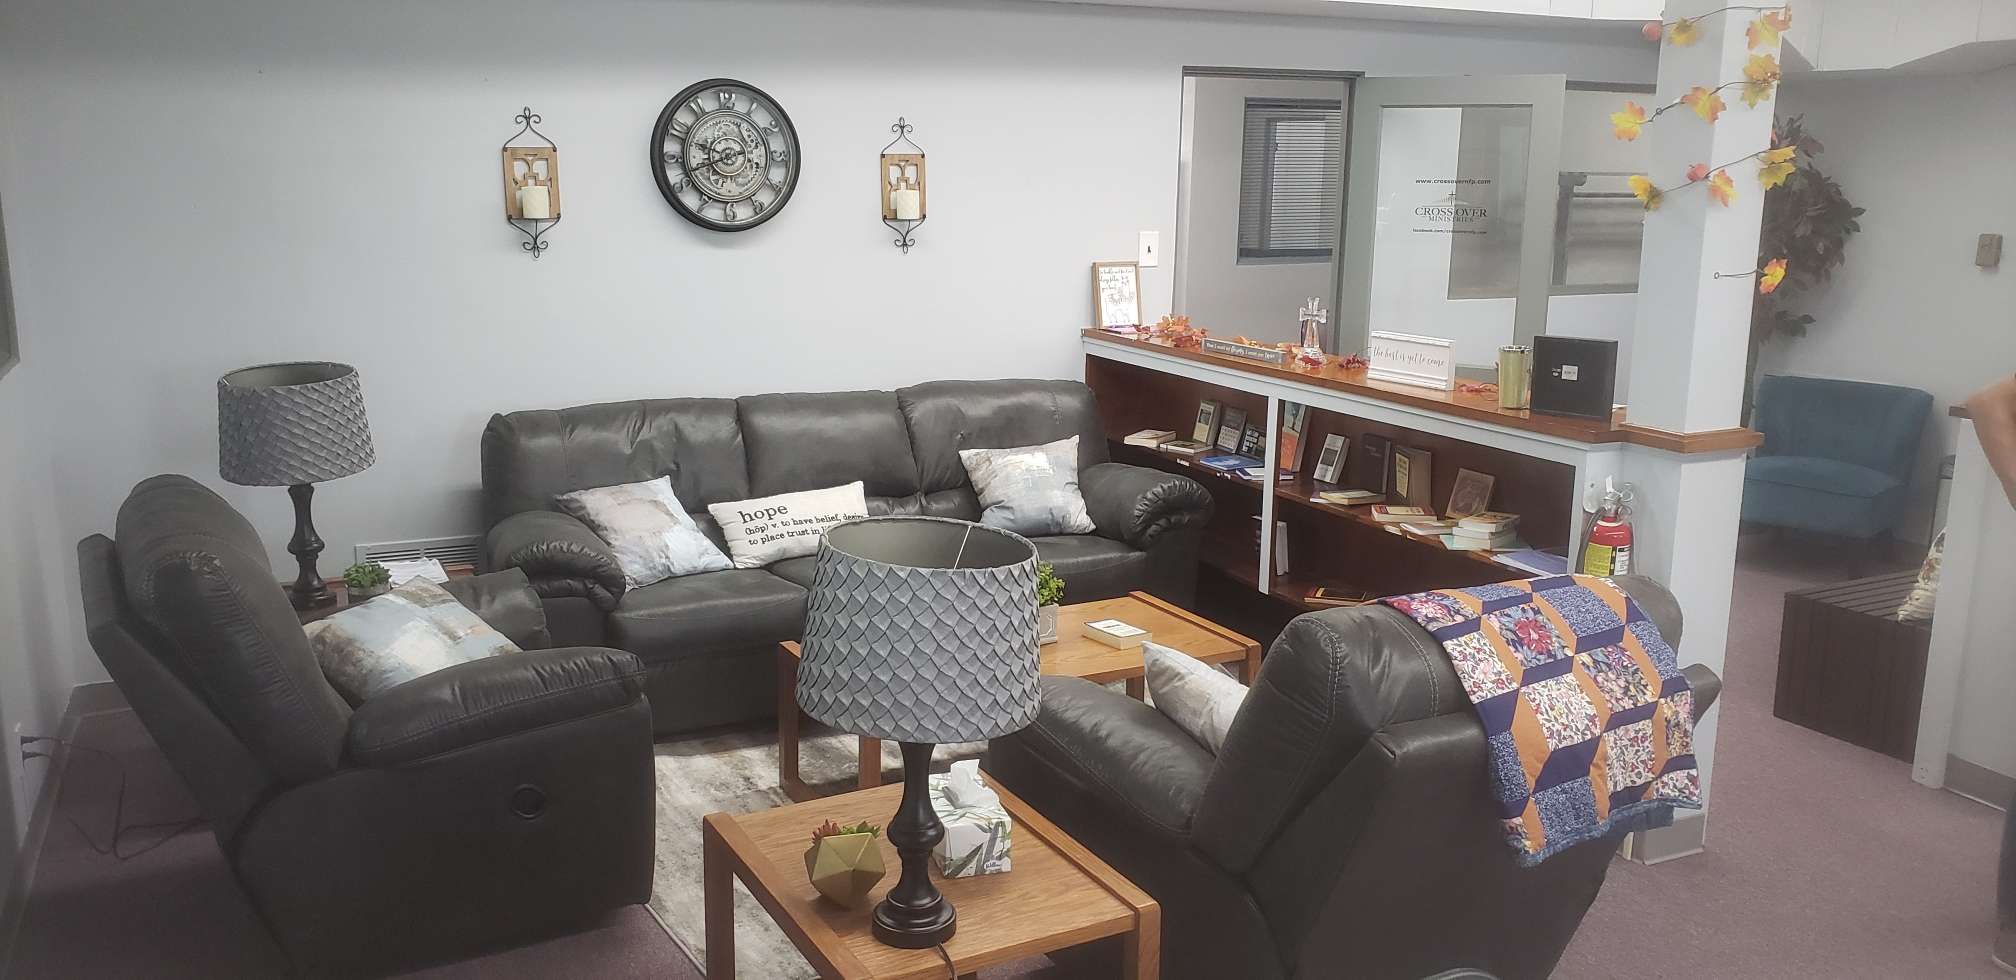 dark leather chairs and sofa, brown wooden end tables and book shelf, silver and white pillows and lamps in a safe comfortable area